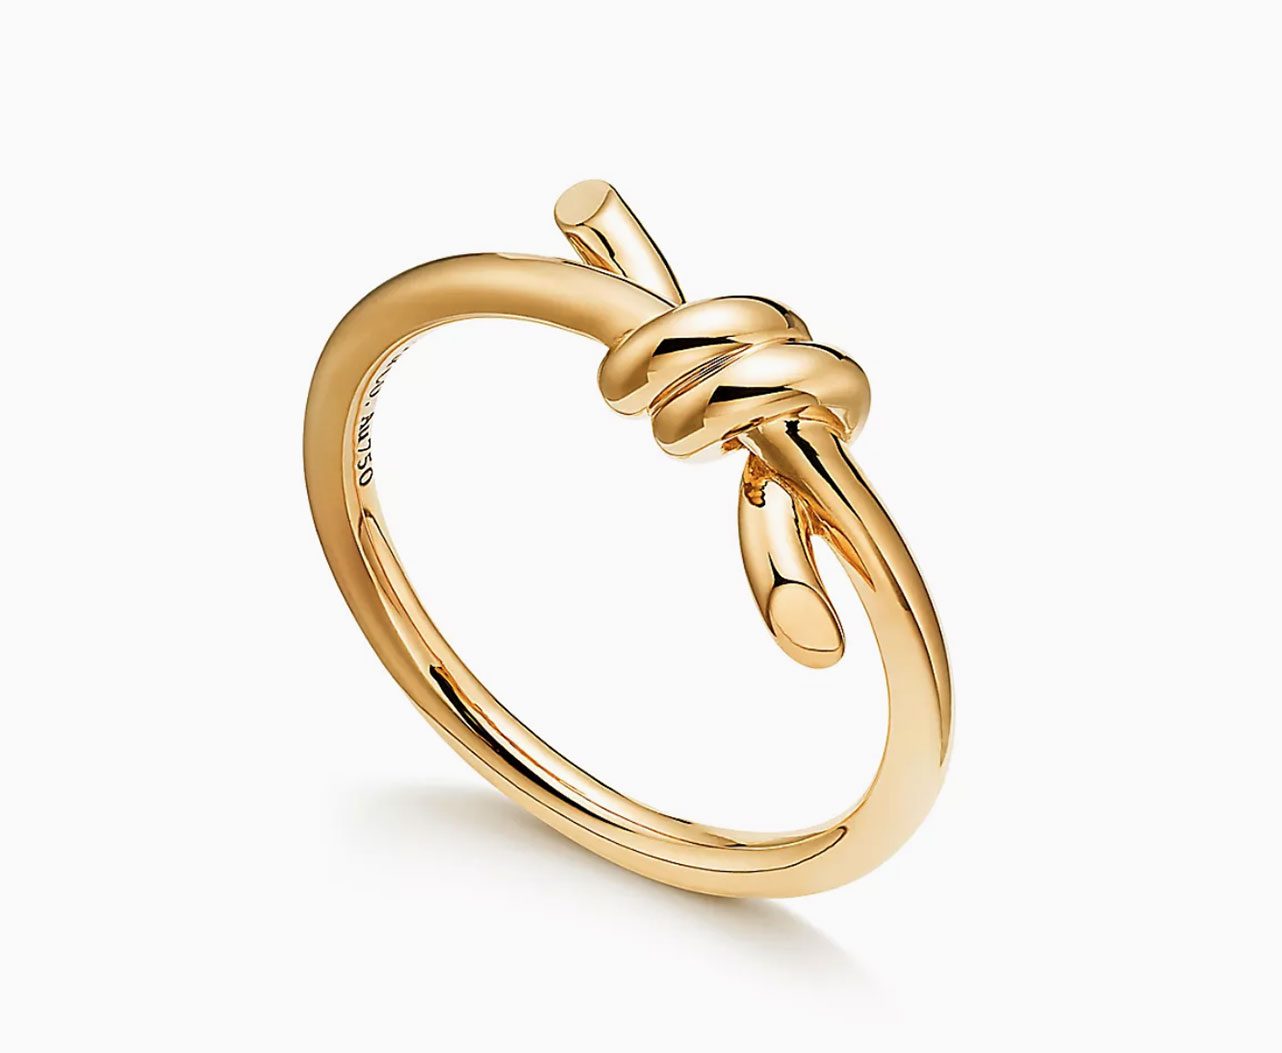 Tiffany Knot Ring in Yellow Gold